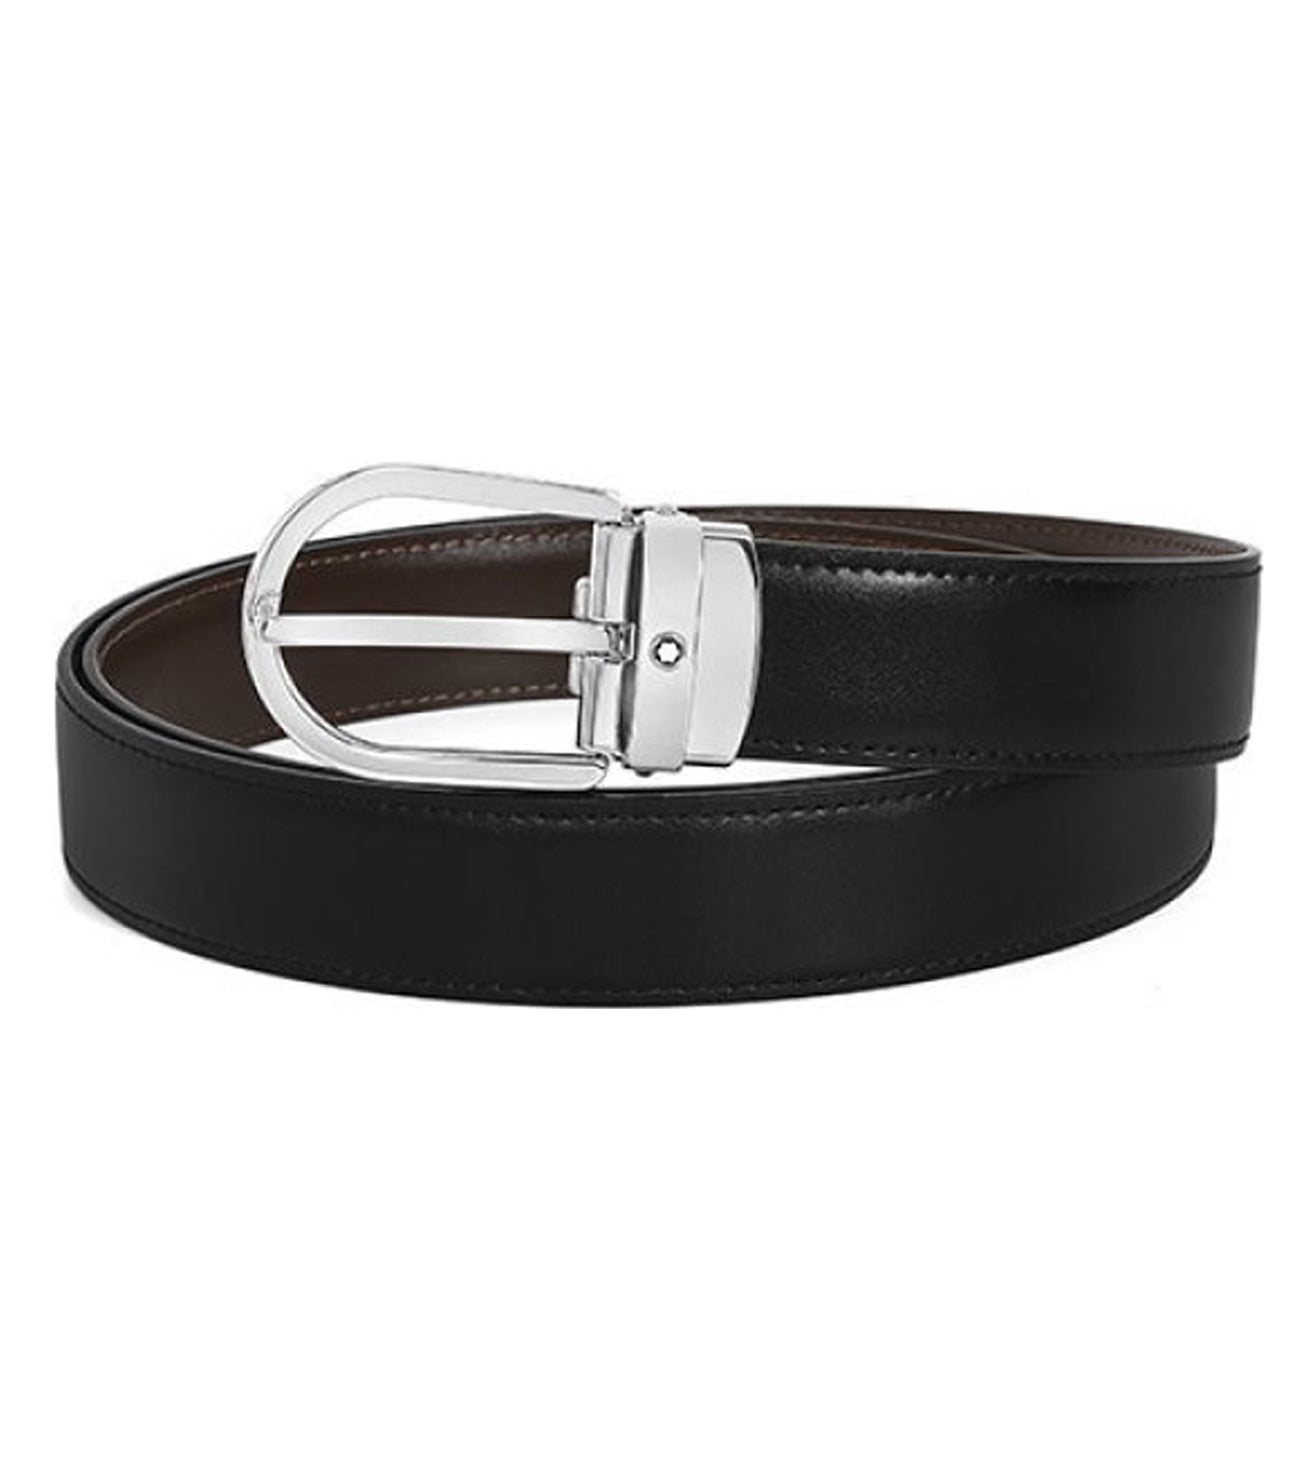 Horse Shoe Pin Buckle Reversible Leather Belt